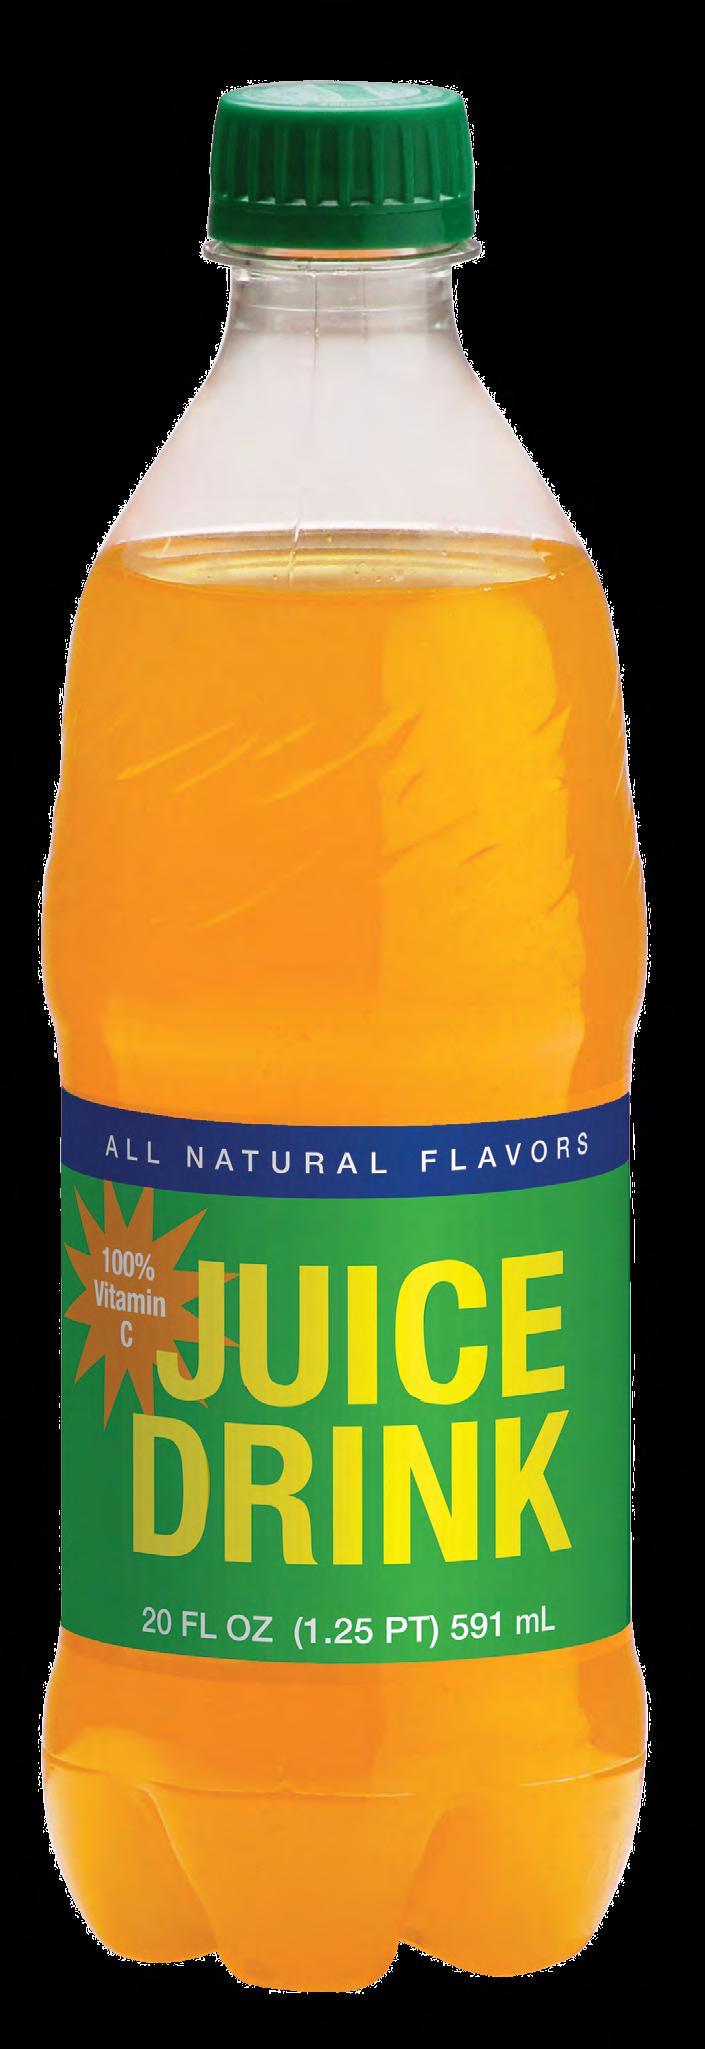 Juice Drink Servings Per Container 2.